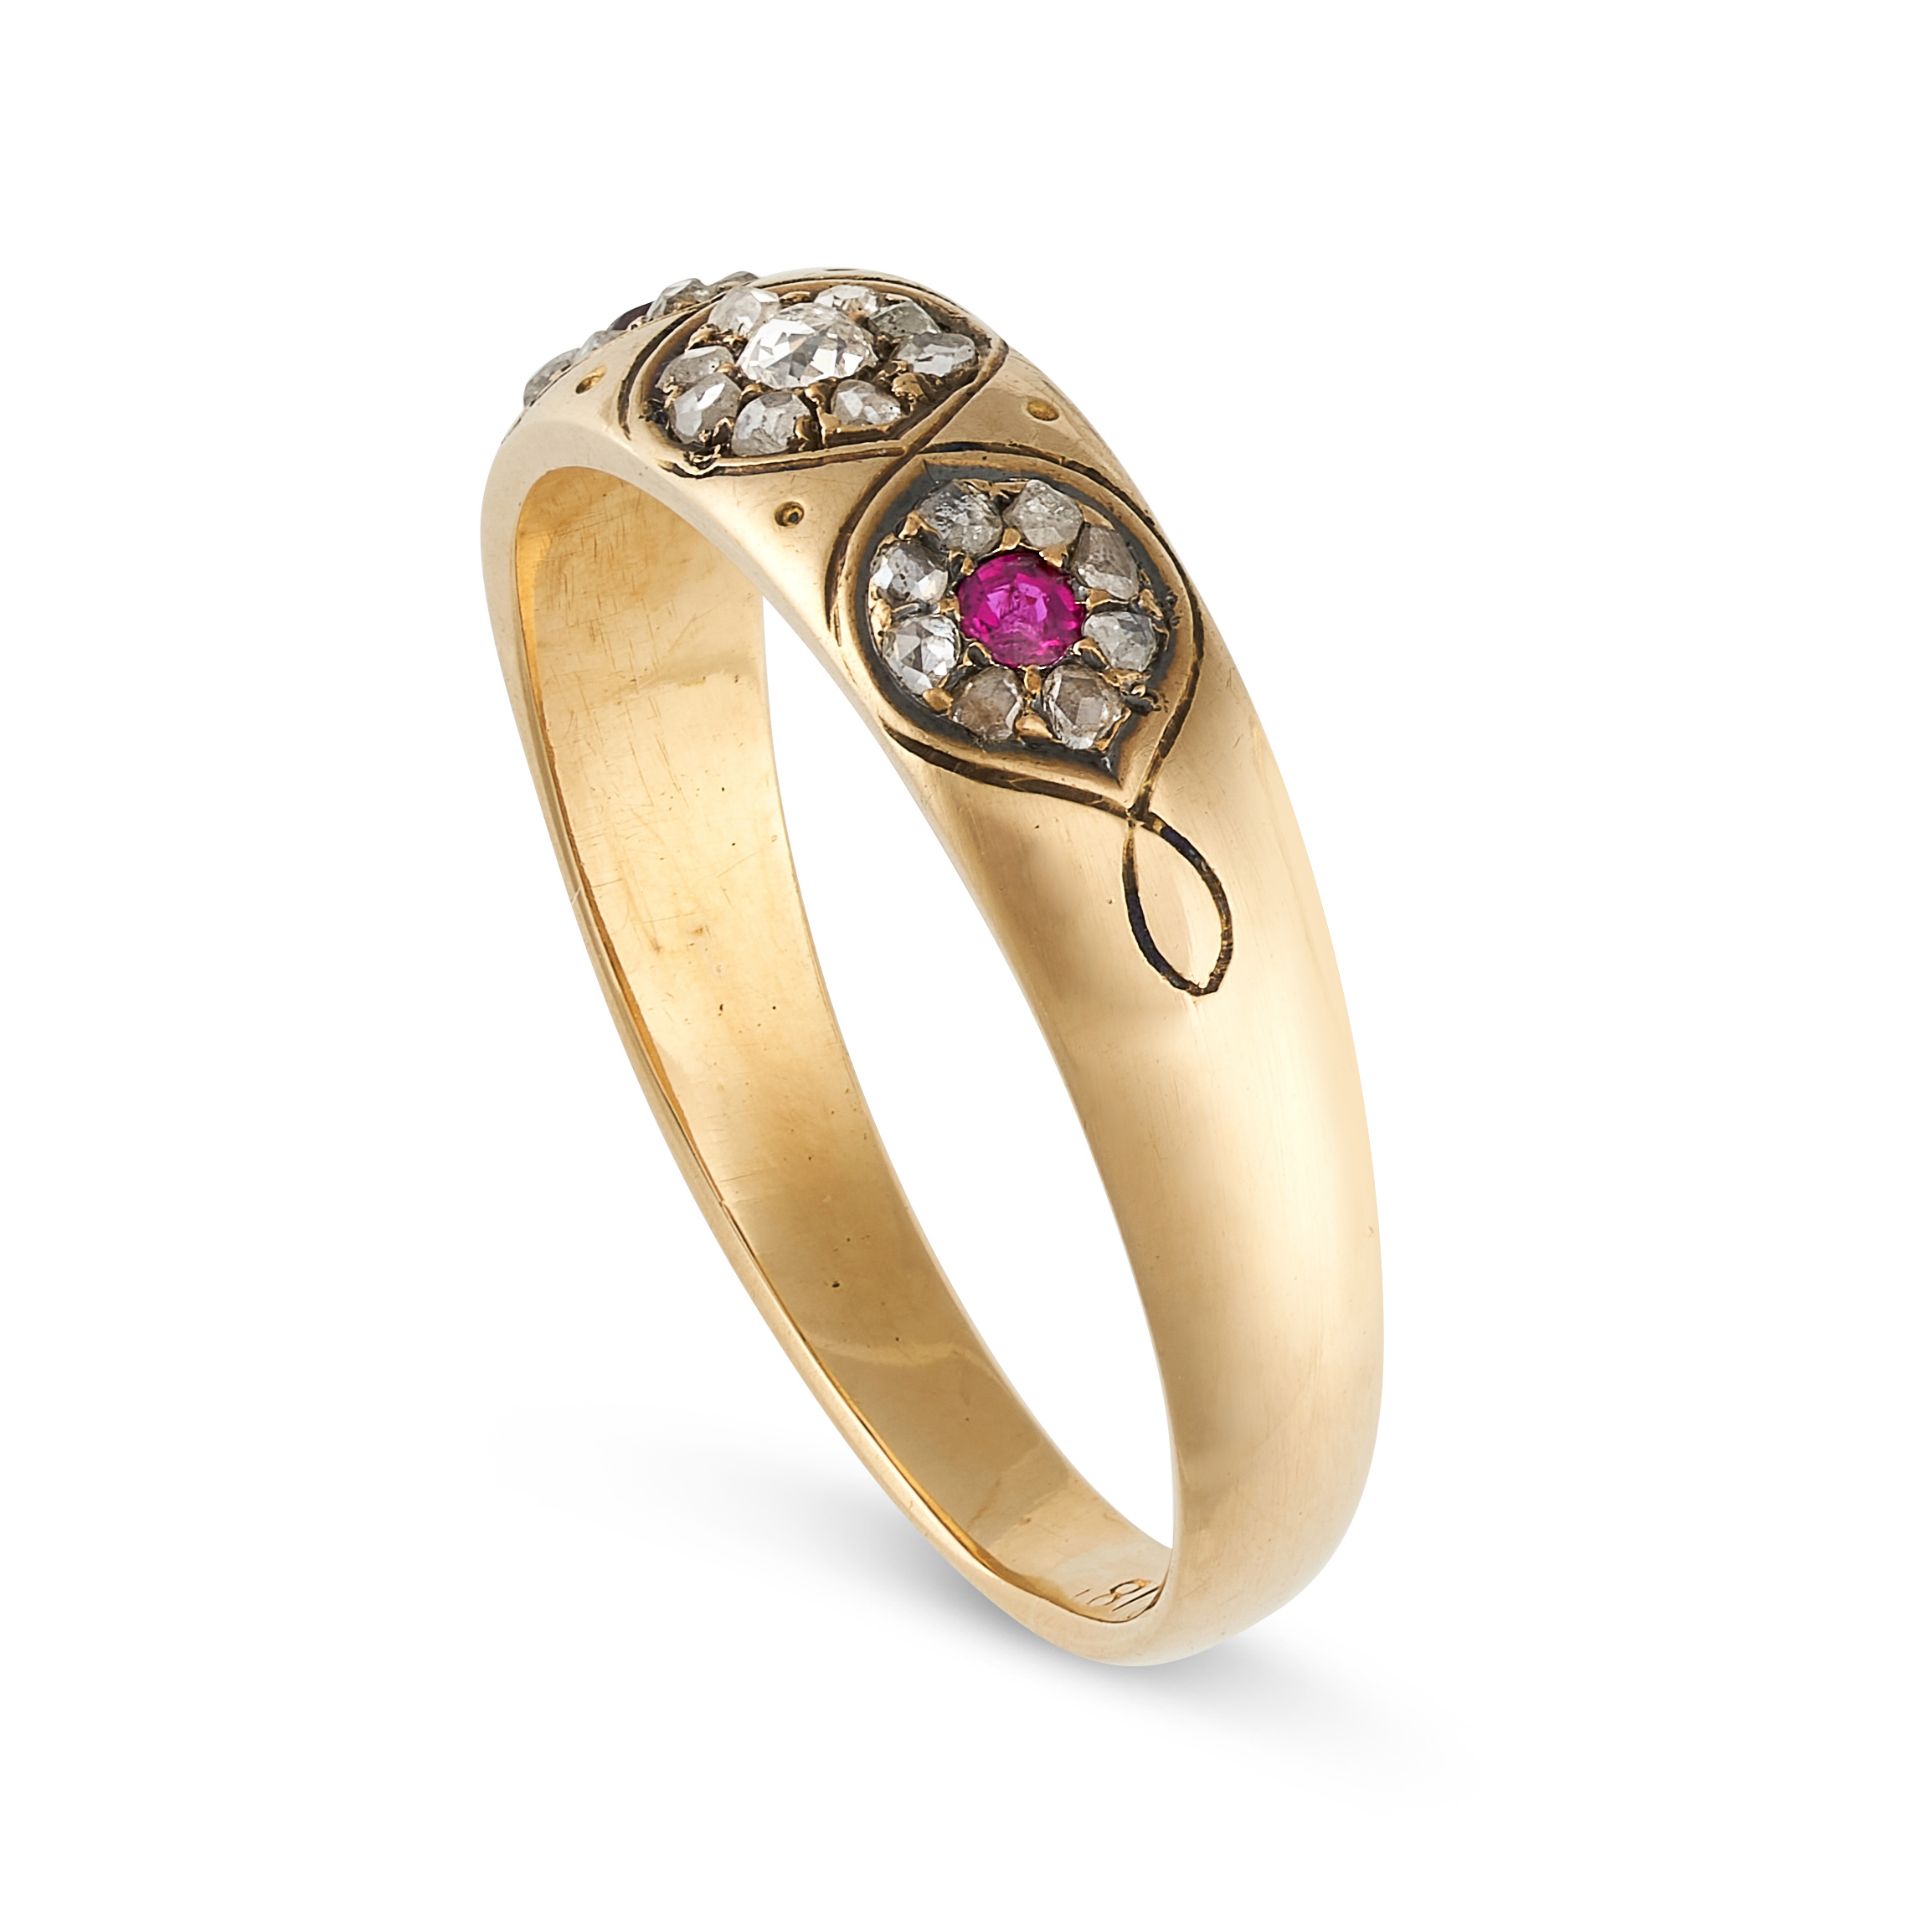 NO RESERVE - A RUBY AND DIAMOND DRESS RING in 18ct yellow gold, the tapering band set with three - Image 2 of 2